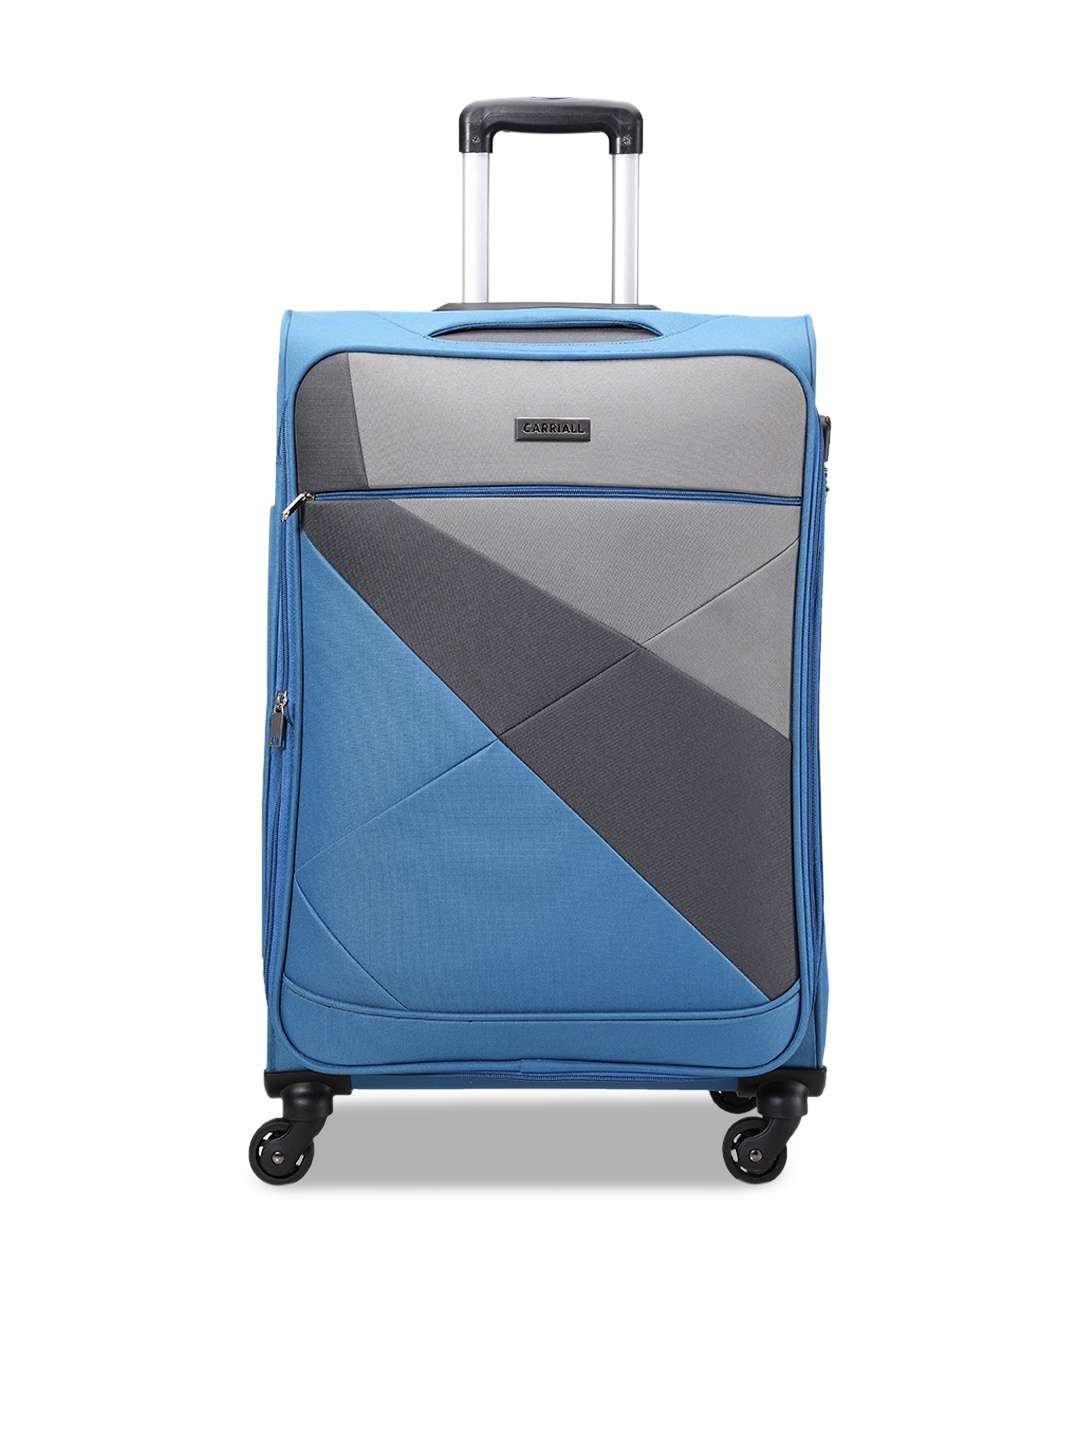 CARRIALL Assorted Soft-Sided Medium Trolley Suitcase Price in India